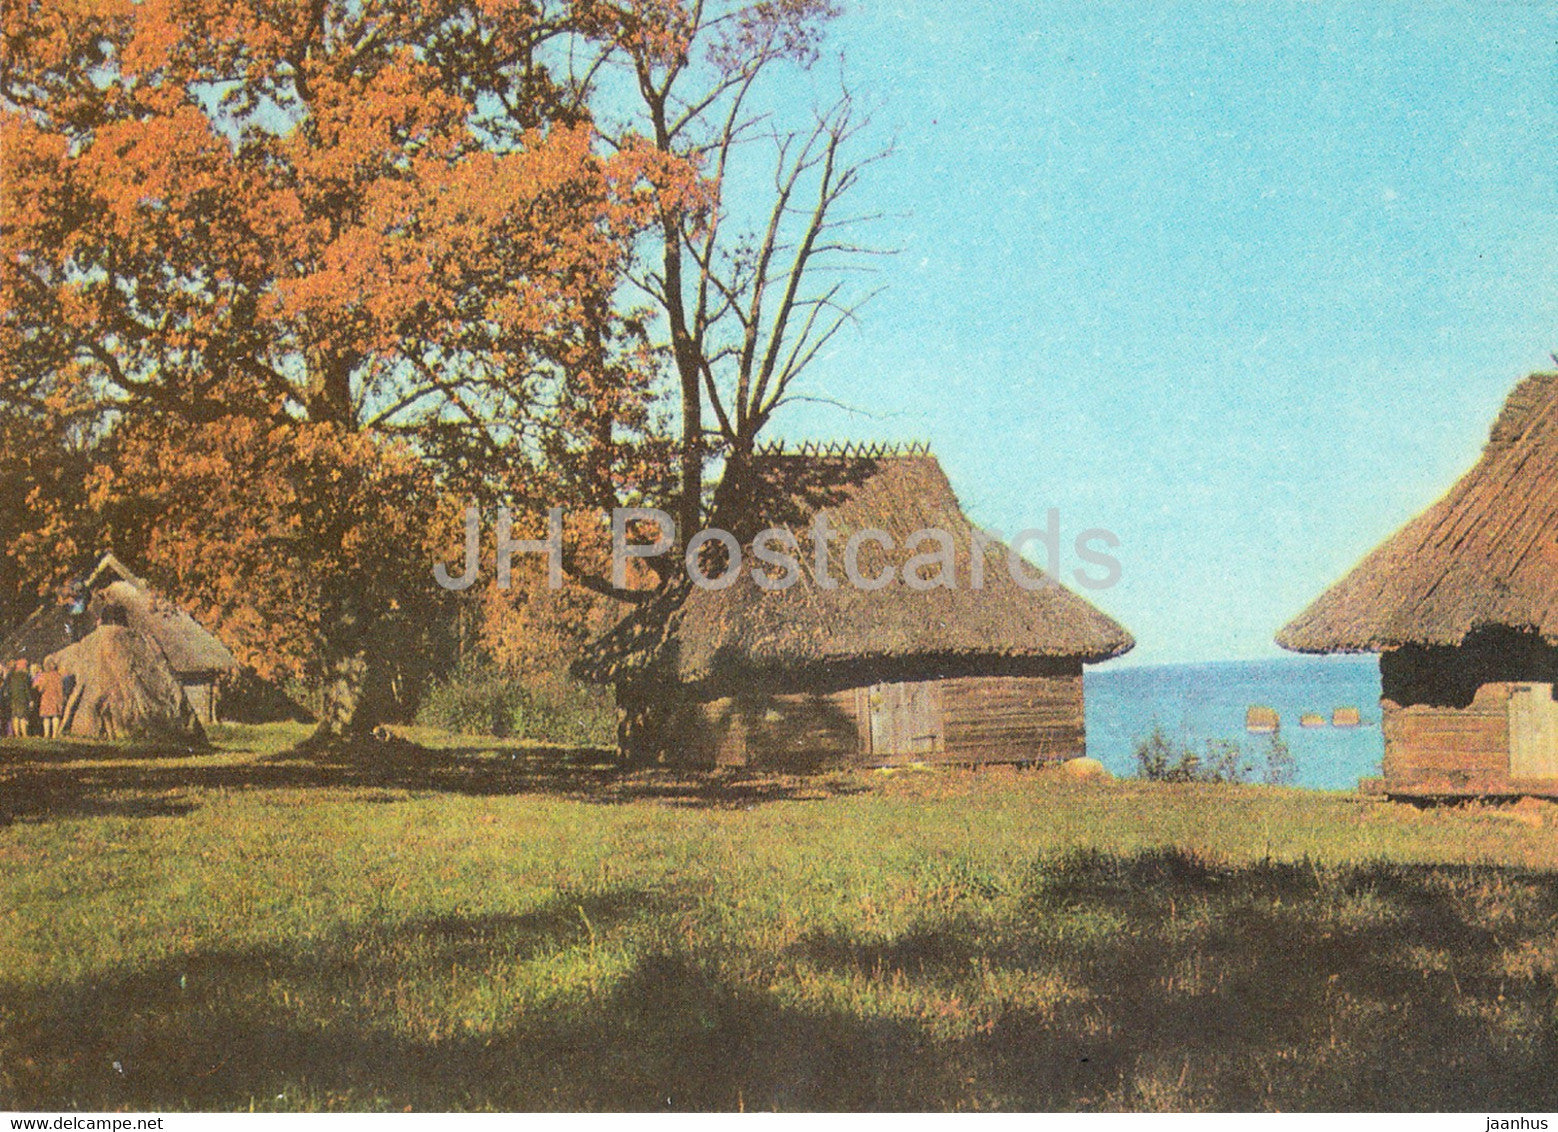 Estonian Open Air Museum - Net Sheds in the zone of the islands - 1977 - Estonia USSR - unused - JH Postcards